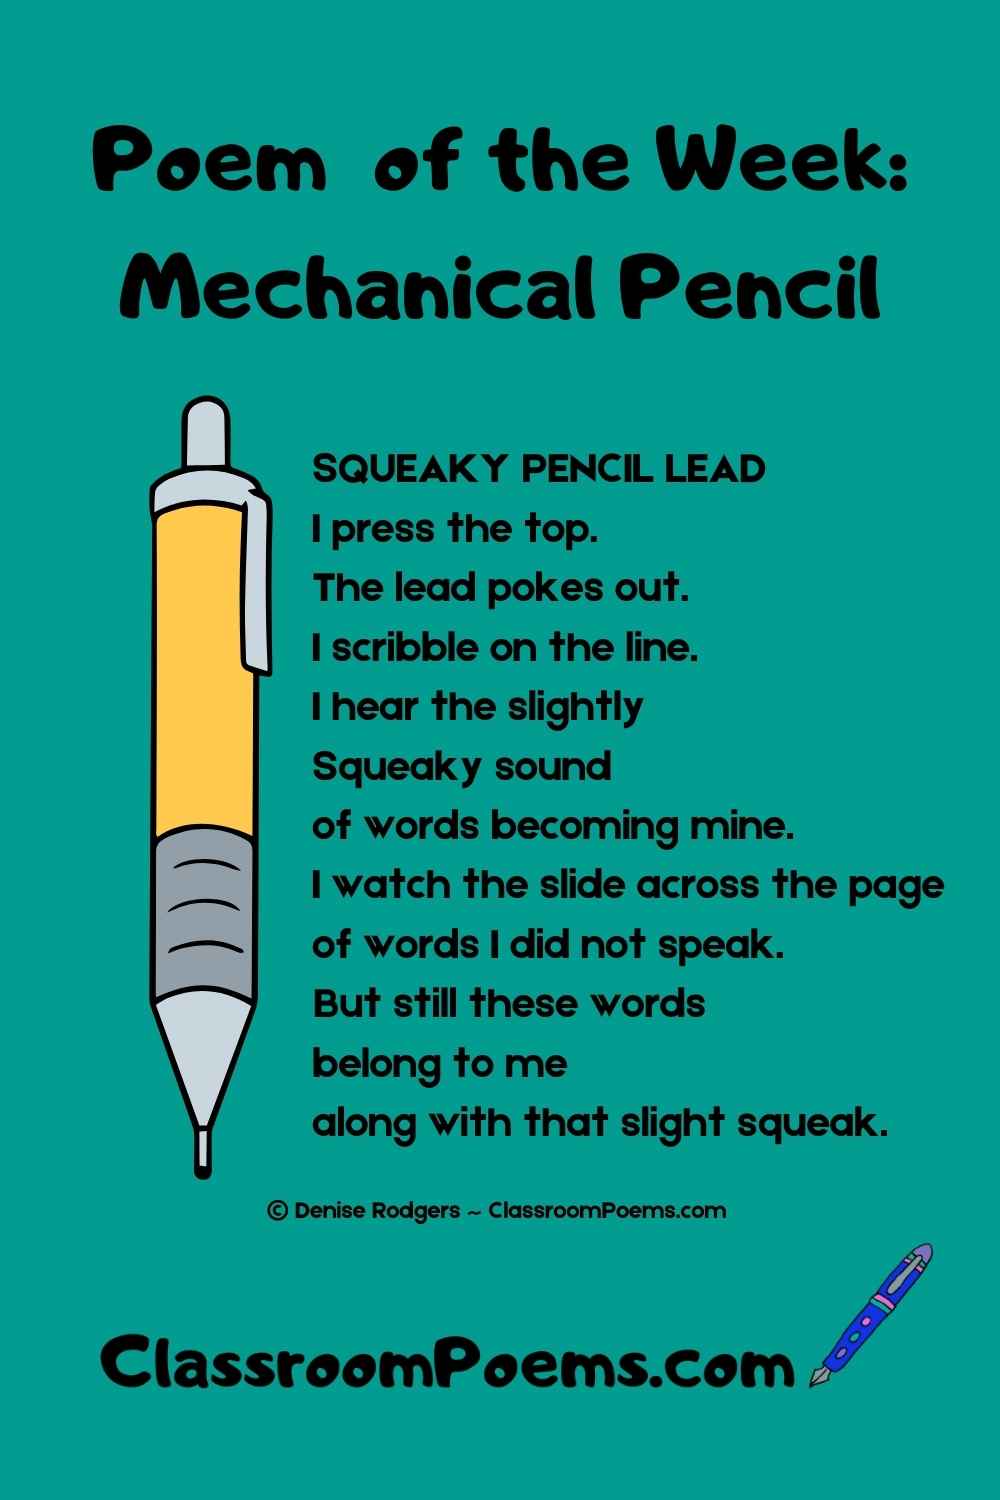 Mechanical Pencil Poem by Denise Rodgers on ClassroomPoems.com.